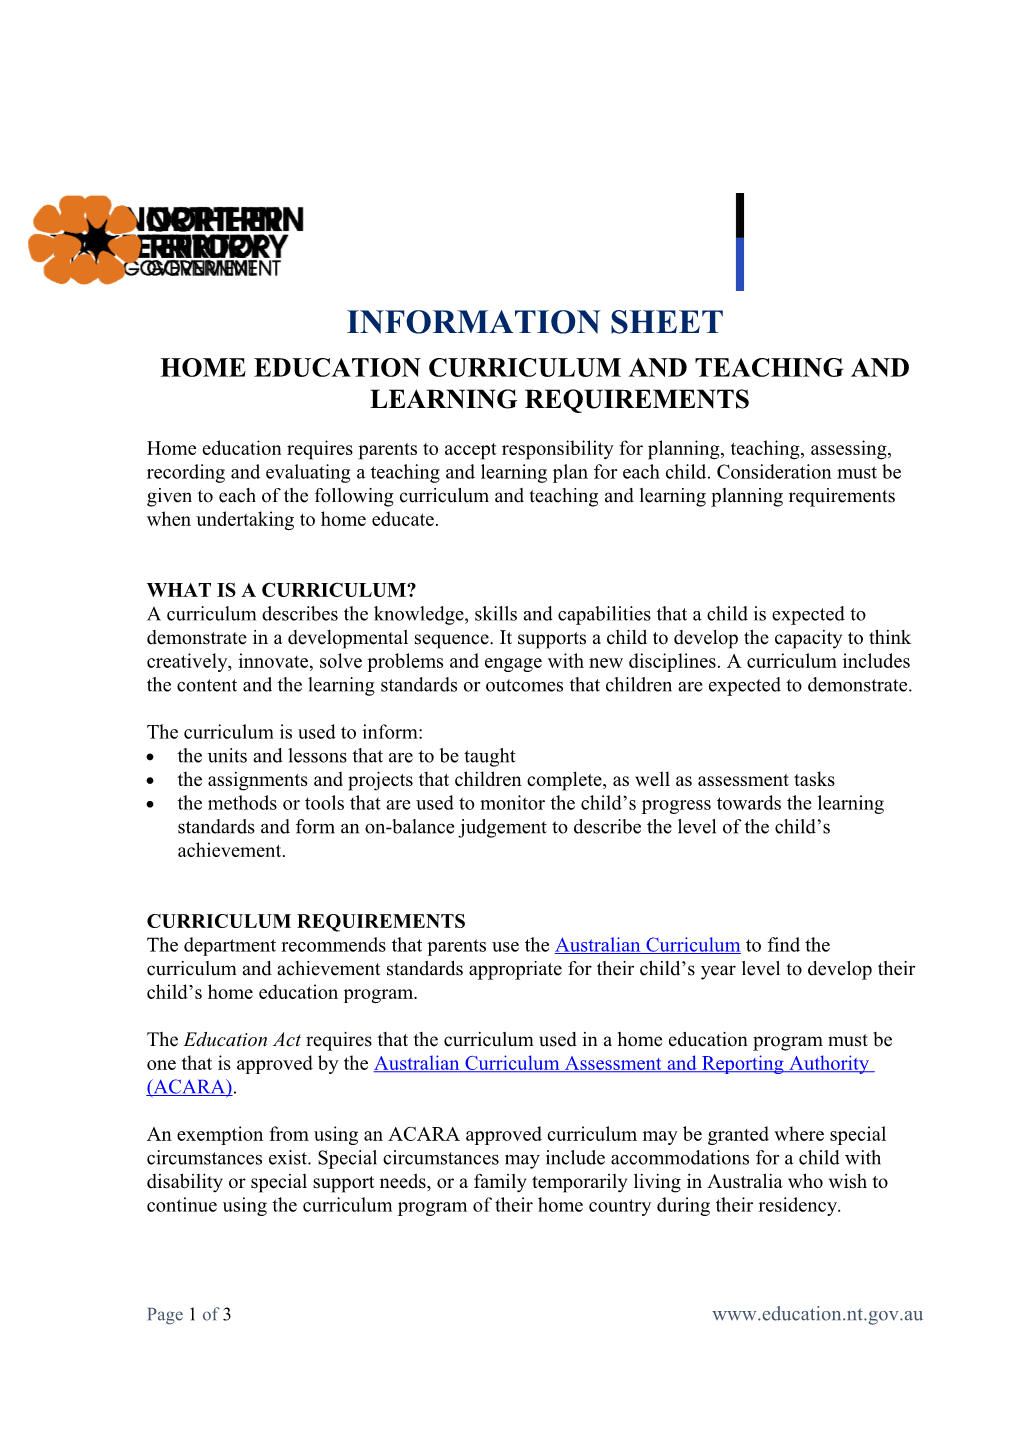 Home Education Curriculum and Teaching and Learning Requirements